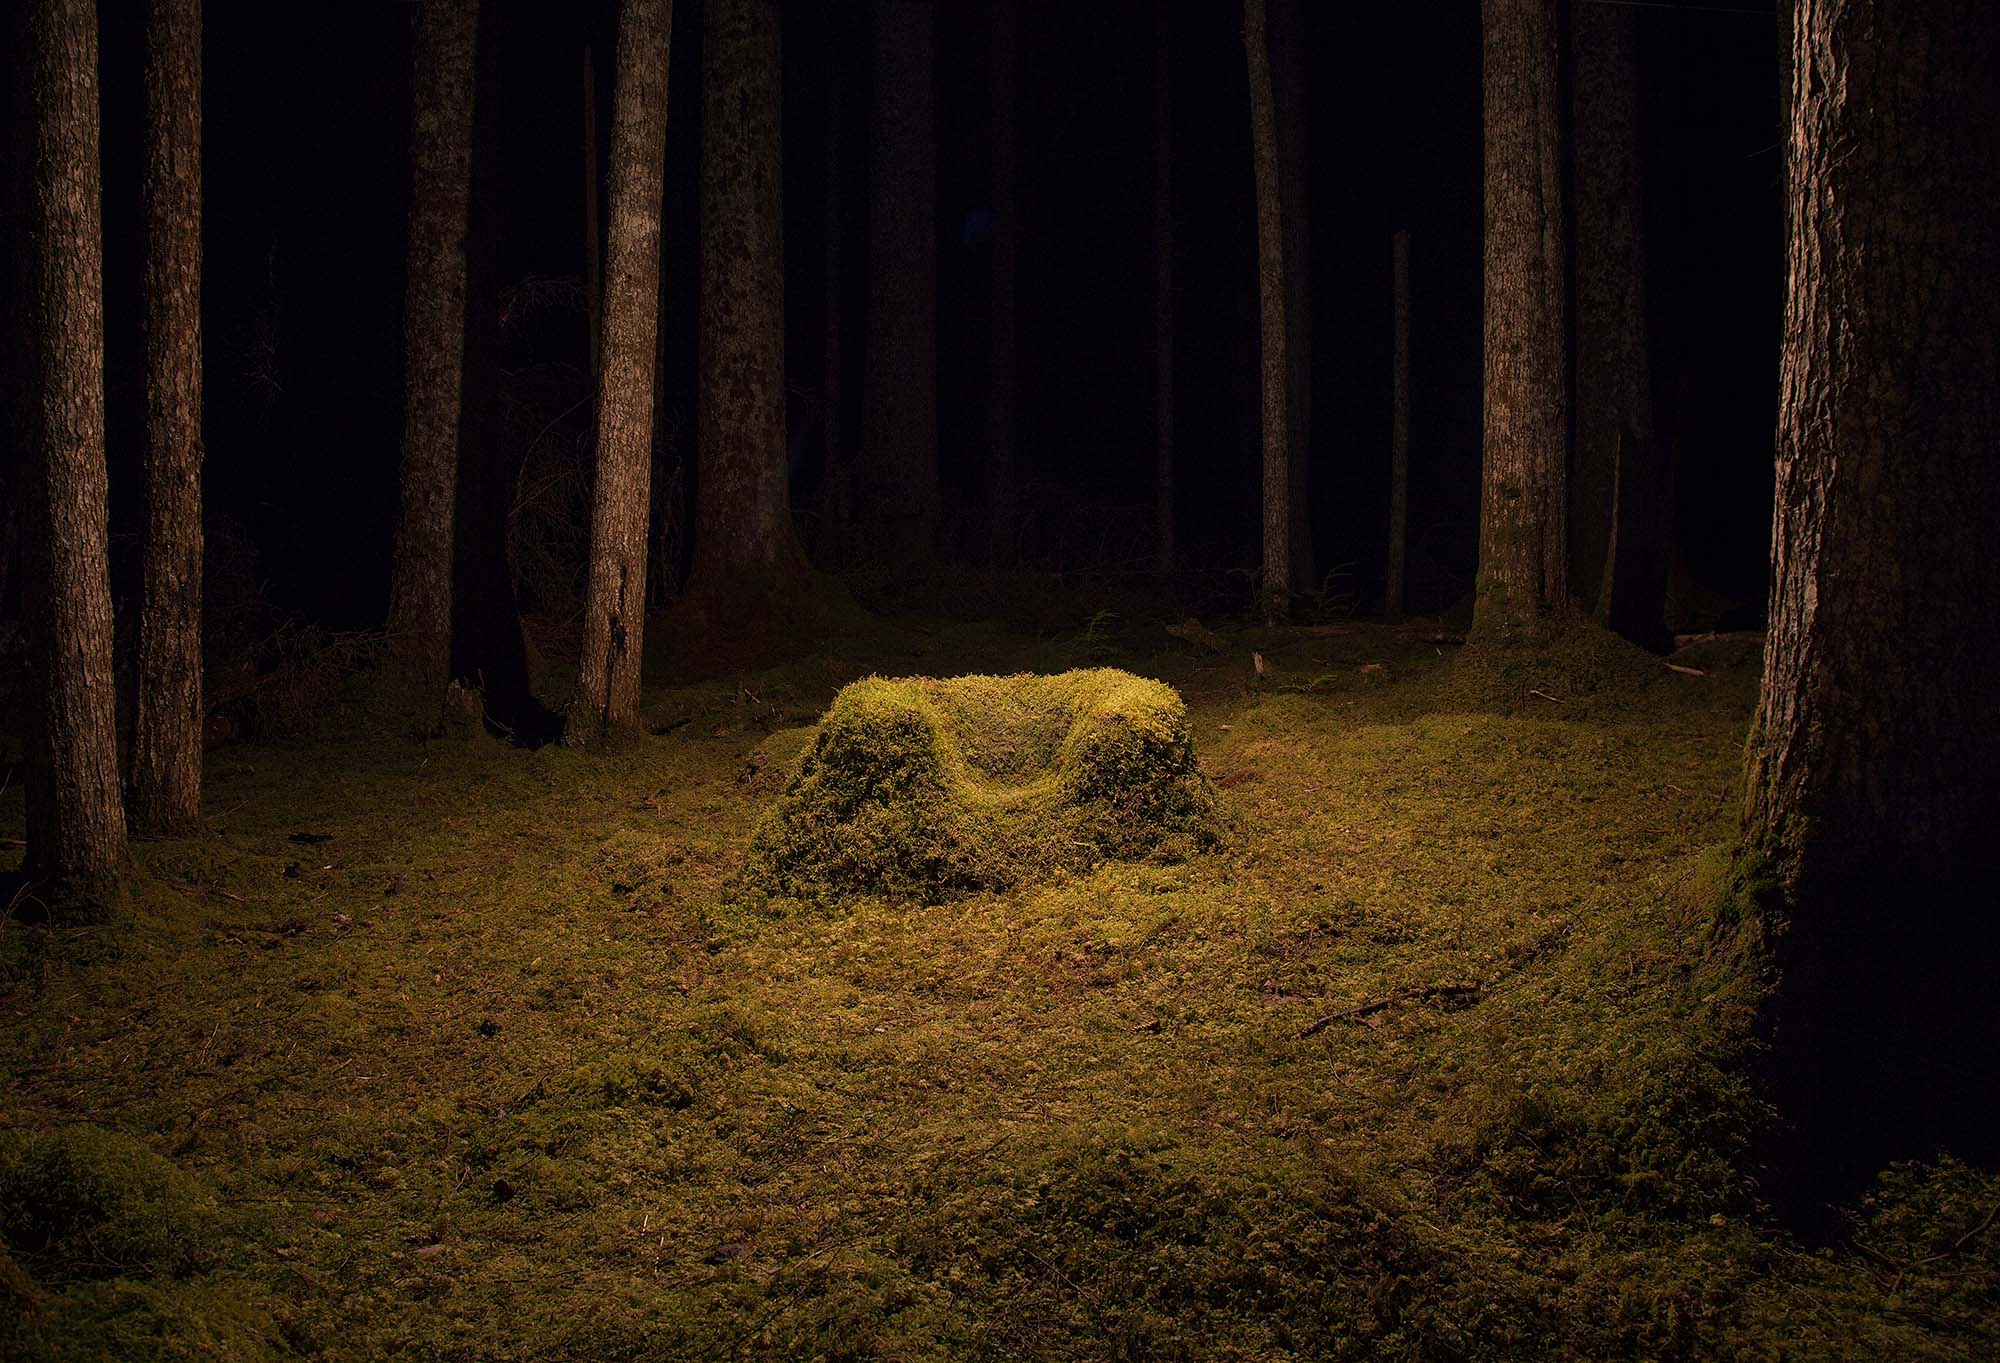 An armchair made of moss sits on mossy ground, lit up amidst a dark forest